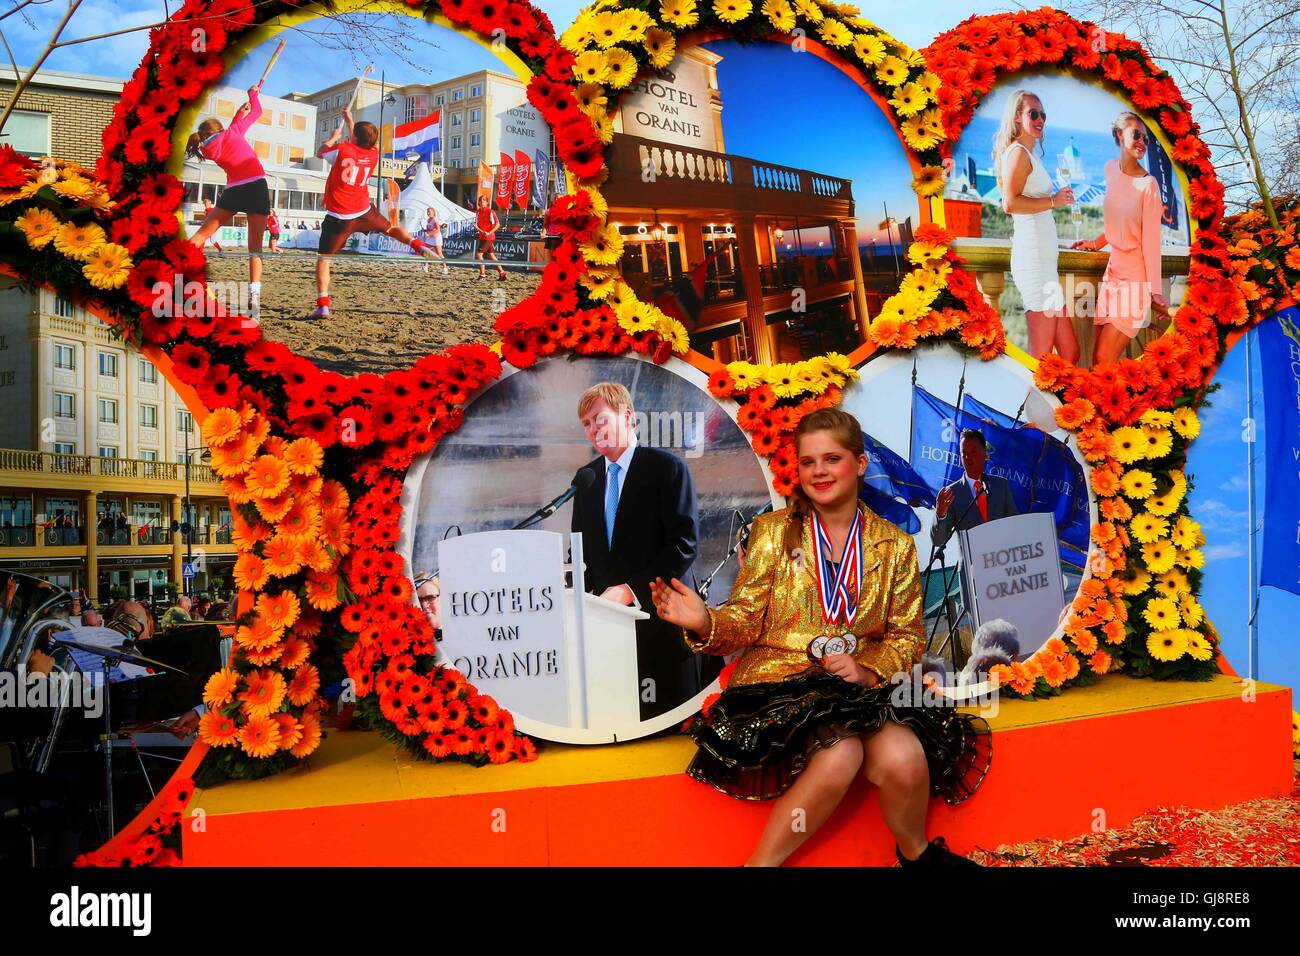 The Hague, Netherlands. 13th Aug, 2016. A woman greets the audience on a float during the Flower Parade in Noordwijk, the Netherlands, on Aug. 13, 2016. The annual Flower Parade since 1946 was held in Rijnsburg, Katwijk and Noordwijk of the Netherlands on Saturday. Credit:  Gong Bing/Xinhua/Alamy Live News Stock Photo